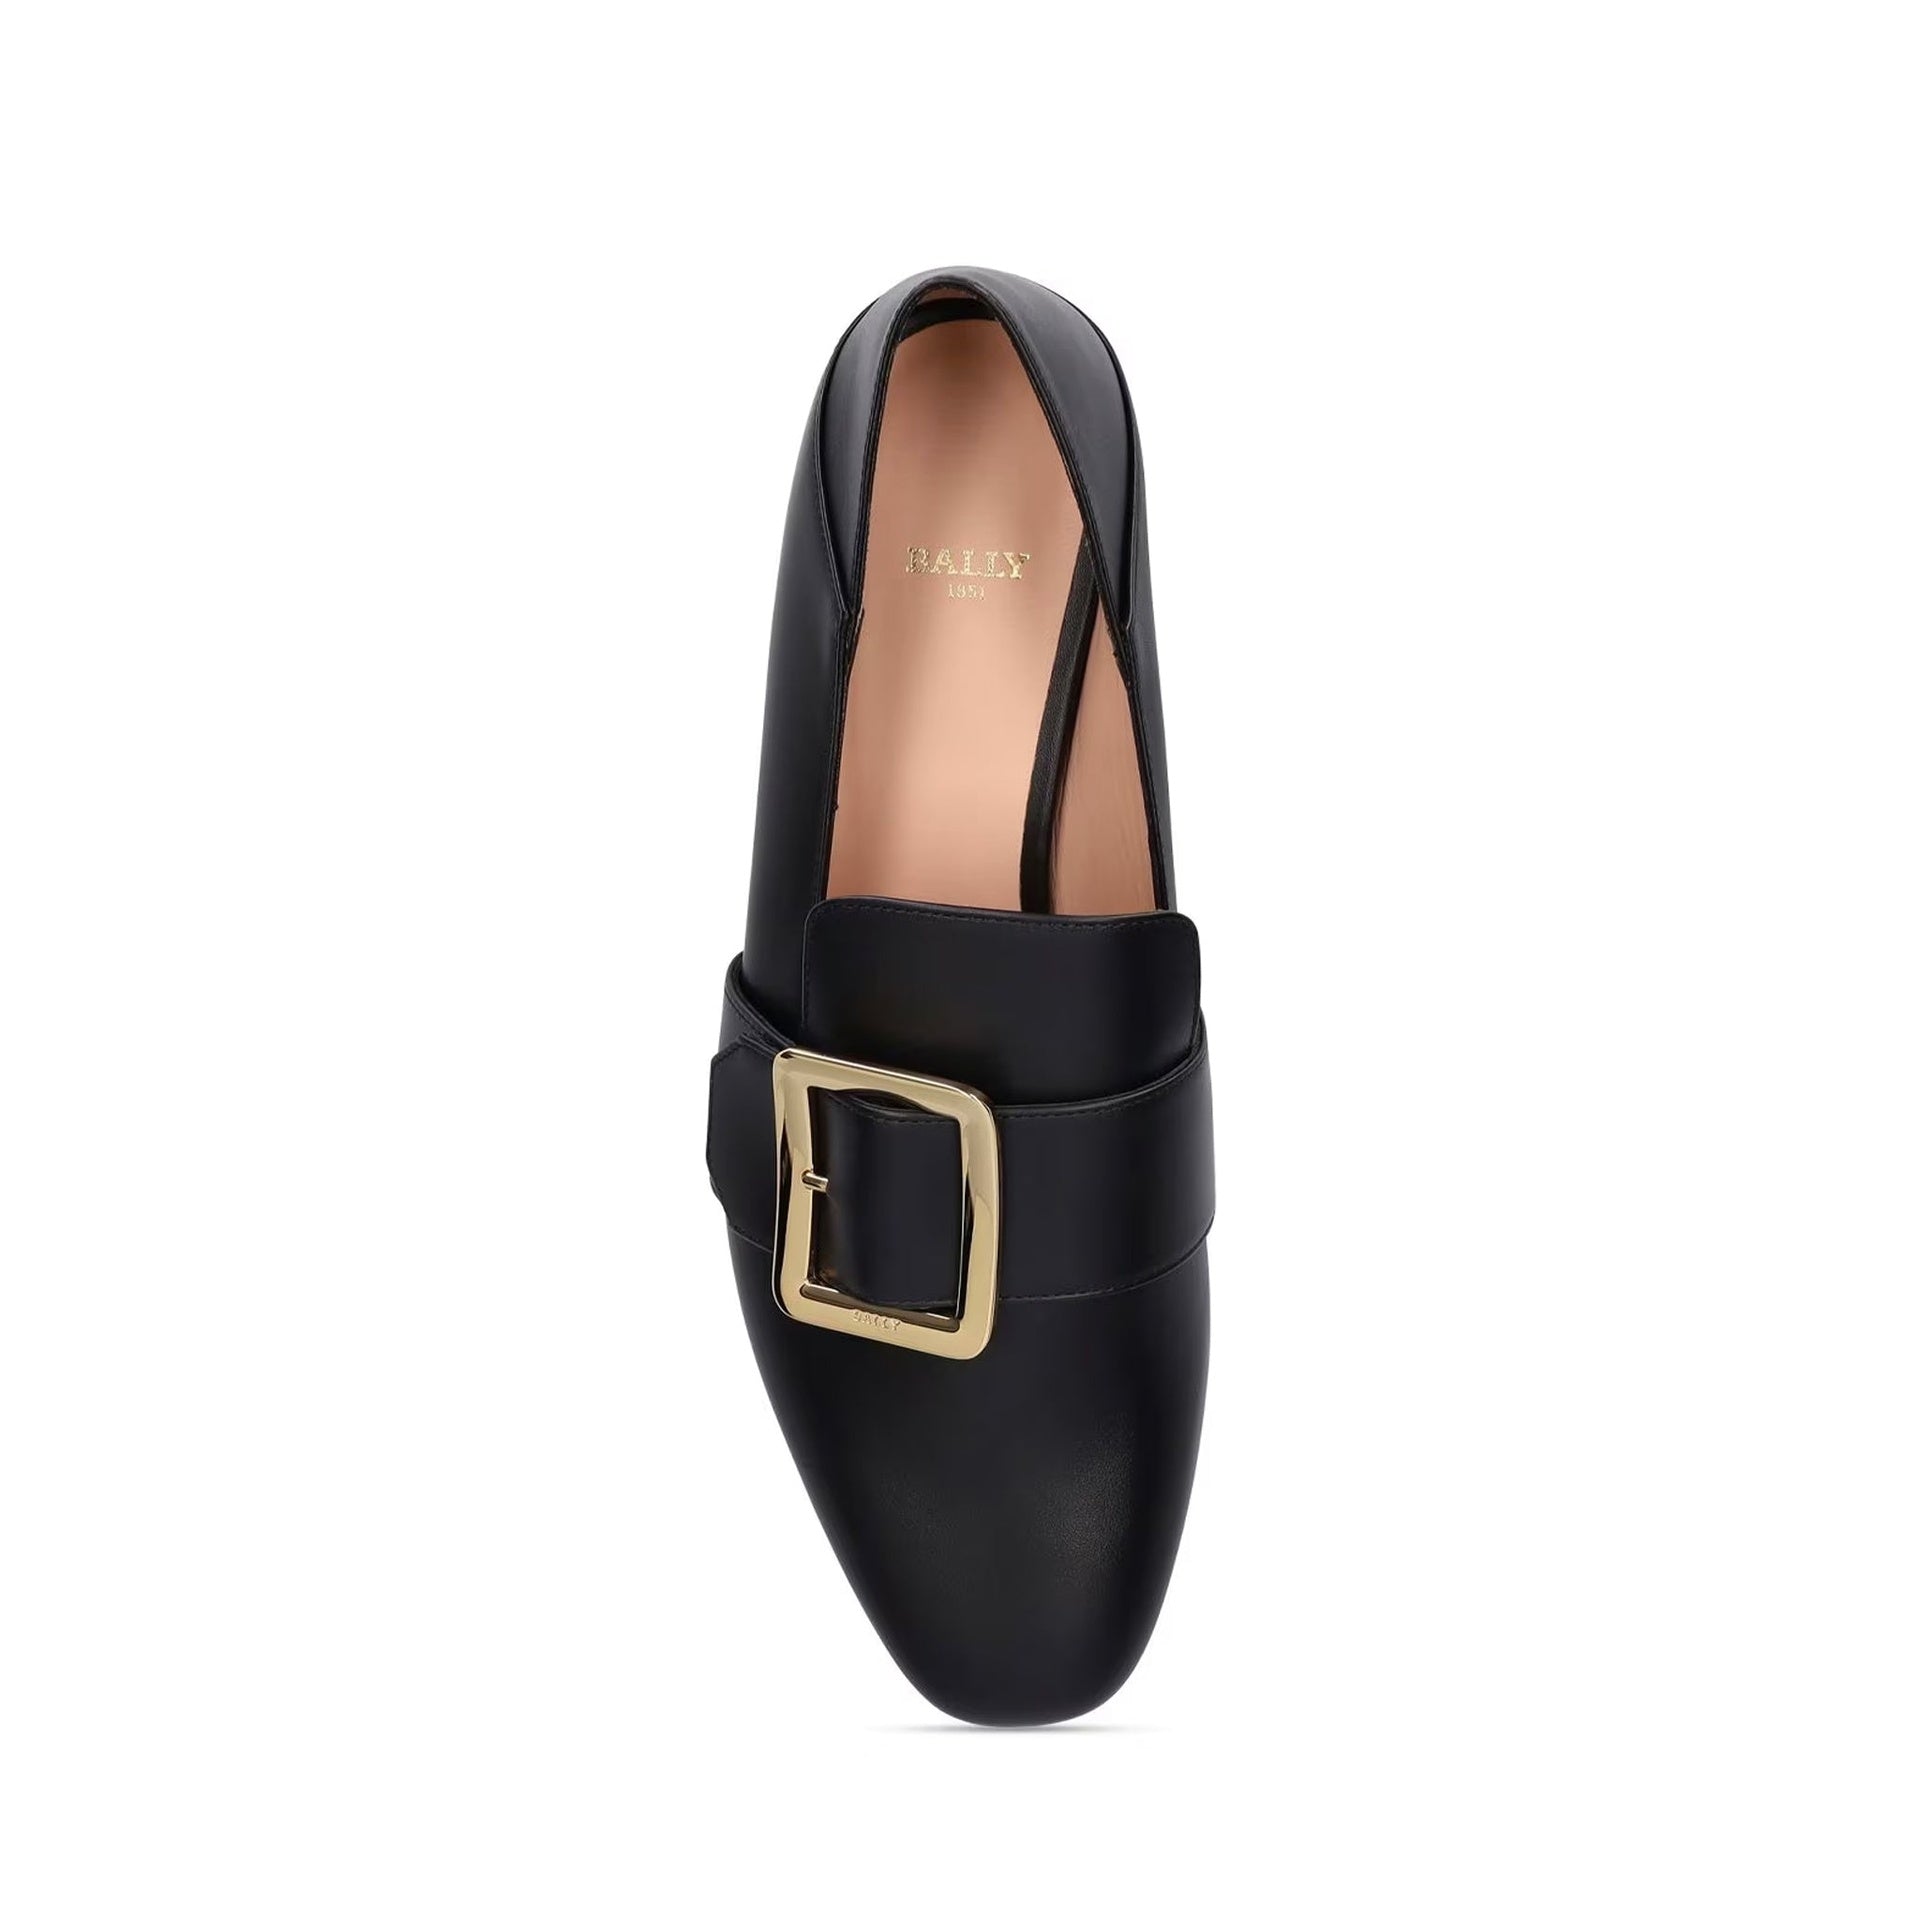 BALLY-OUTLET-SALE-Bally-Leather-Loafers-Halbschuhe-ARCHIVE-COLLECTION-4_dddf561f-c9df-4f01-b15a-9d953312ee96.jpg